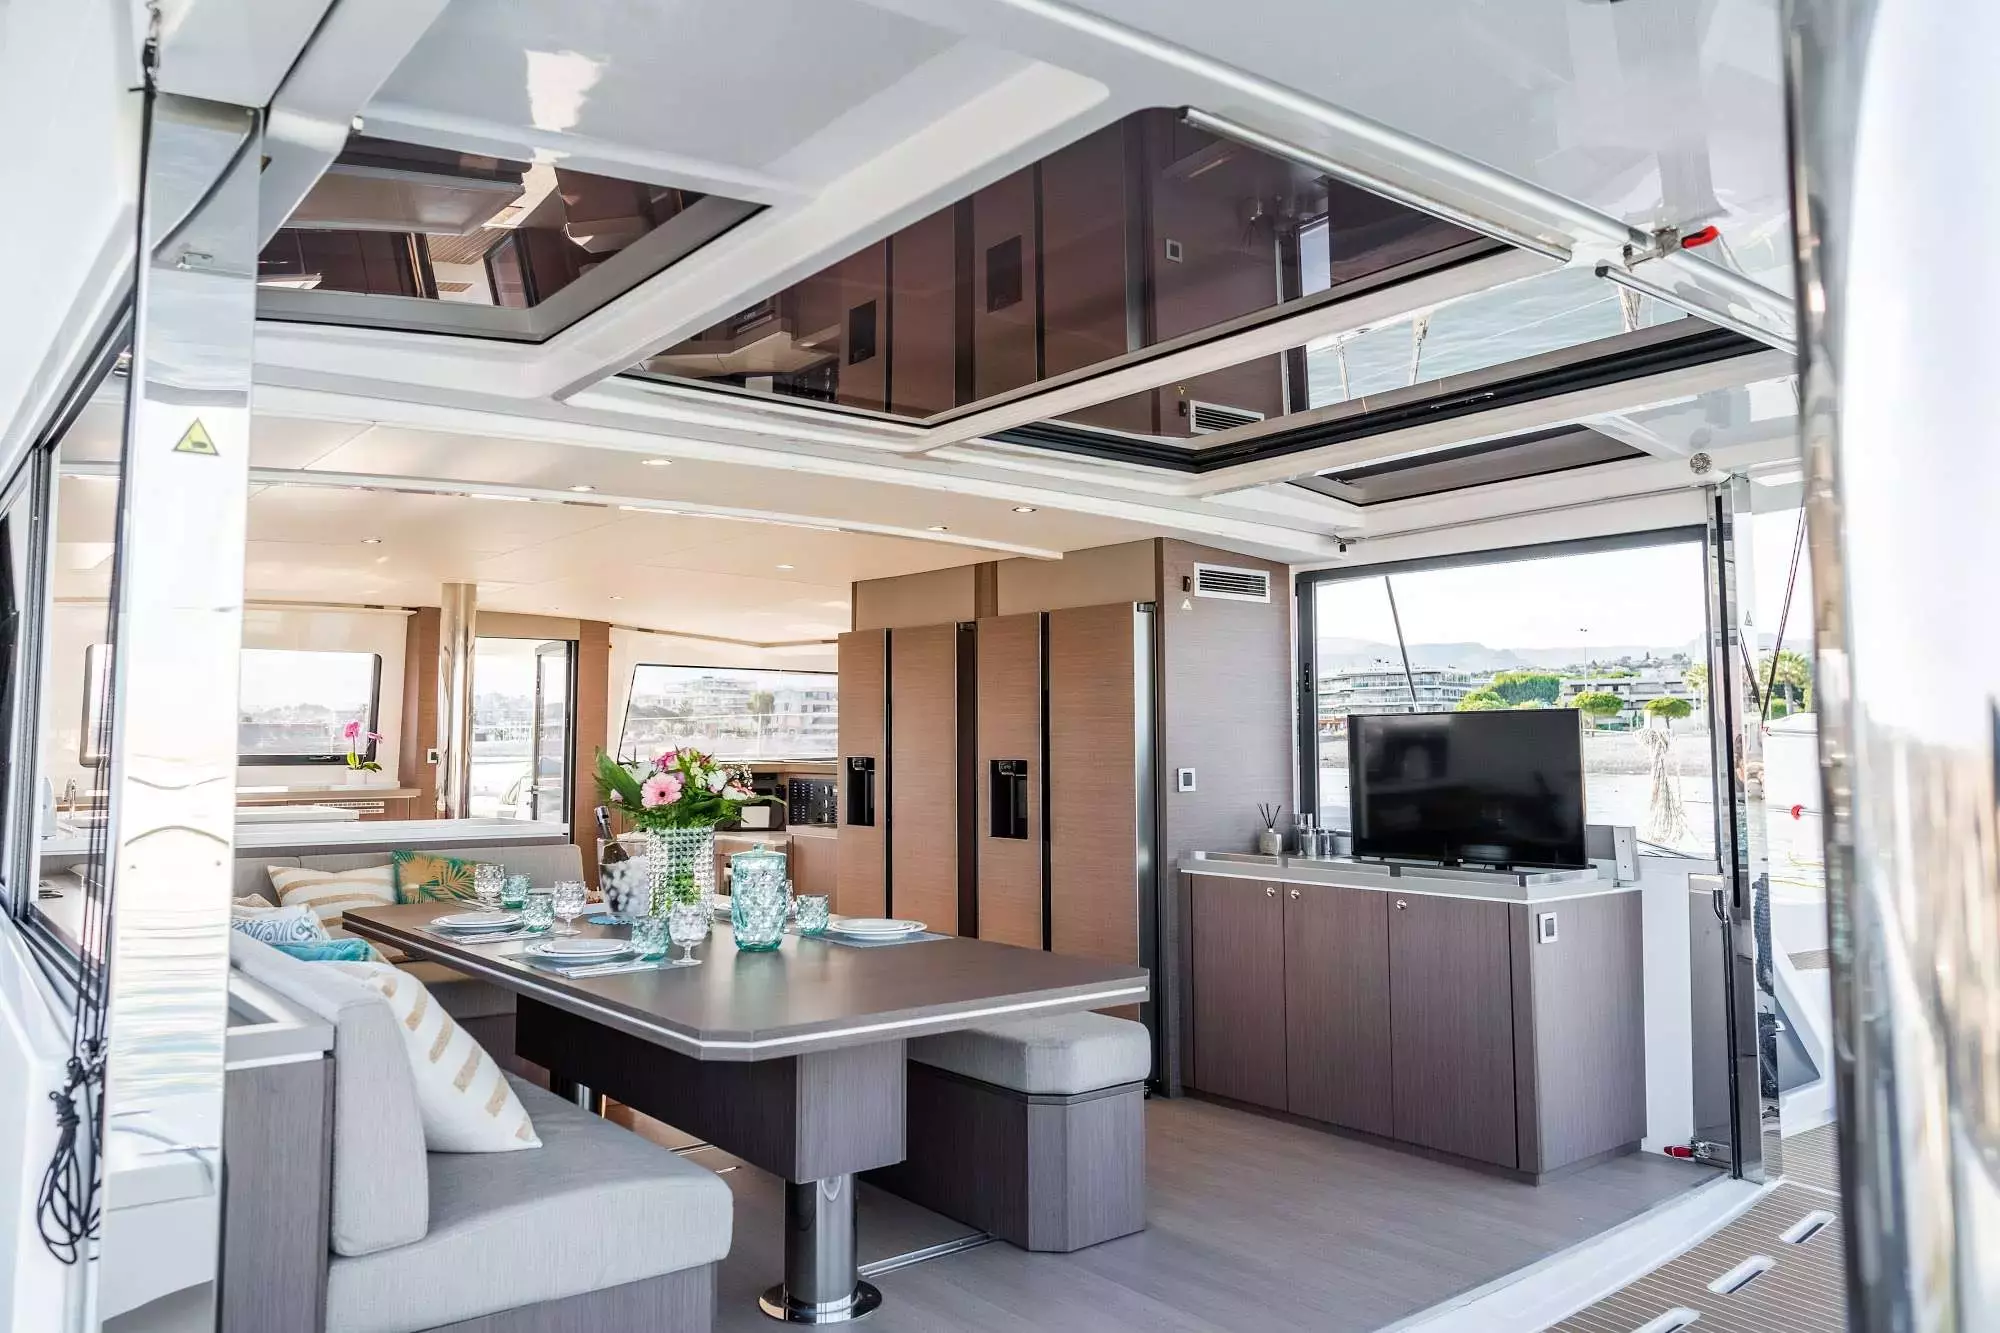 Signature Vision by Bali Catamarans - Top rates for a Rental of a private Sailing Catamaran in Italy